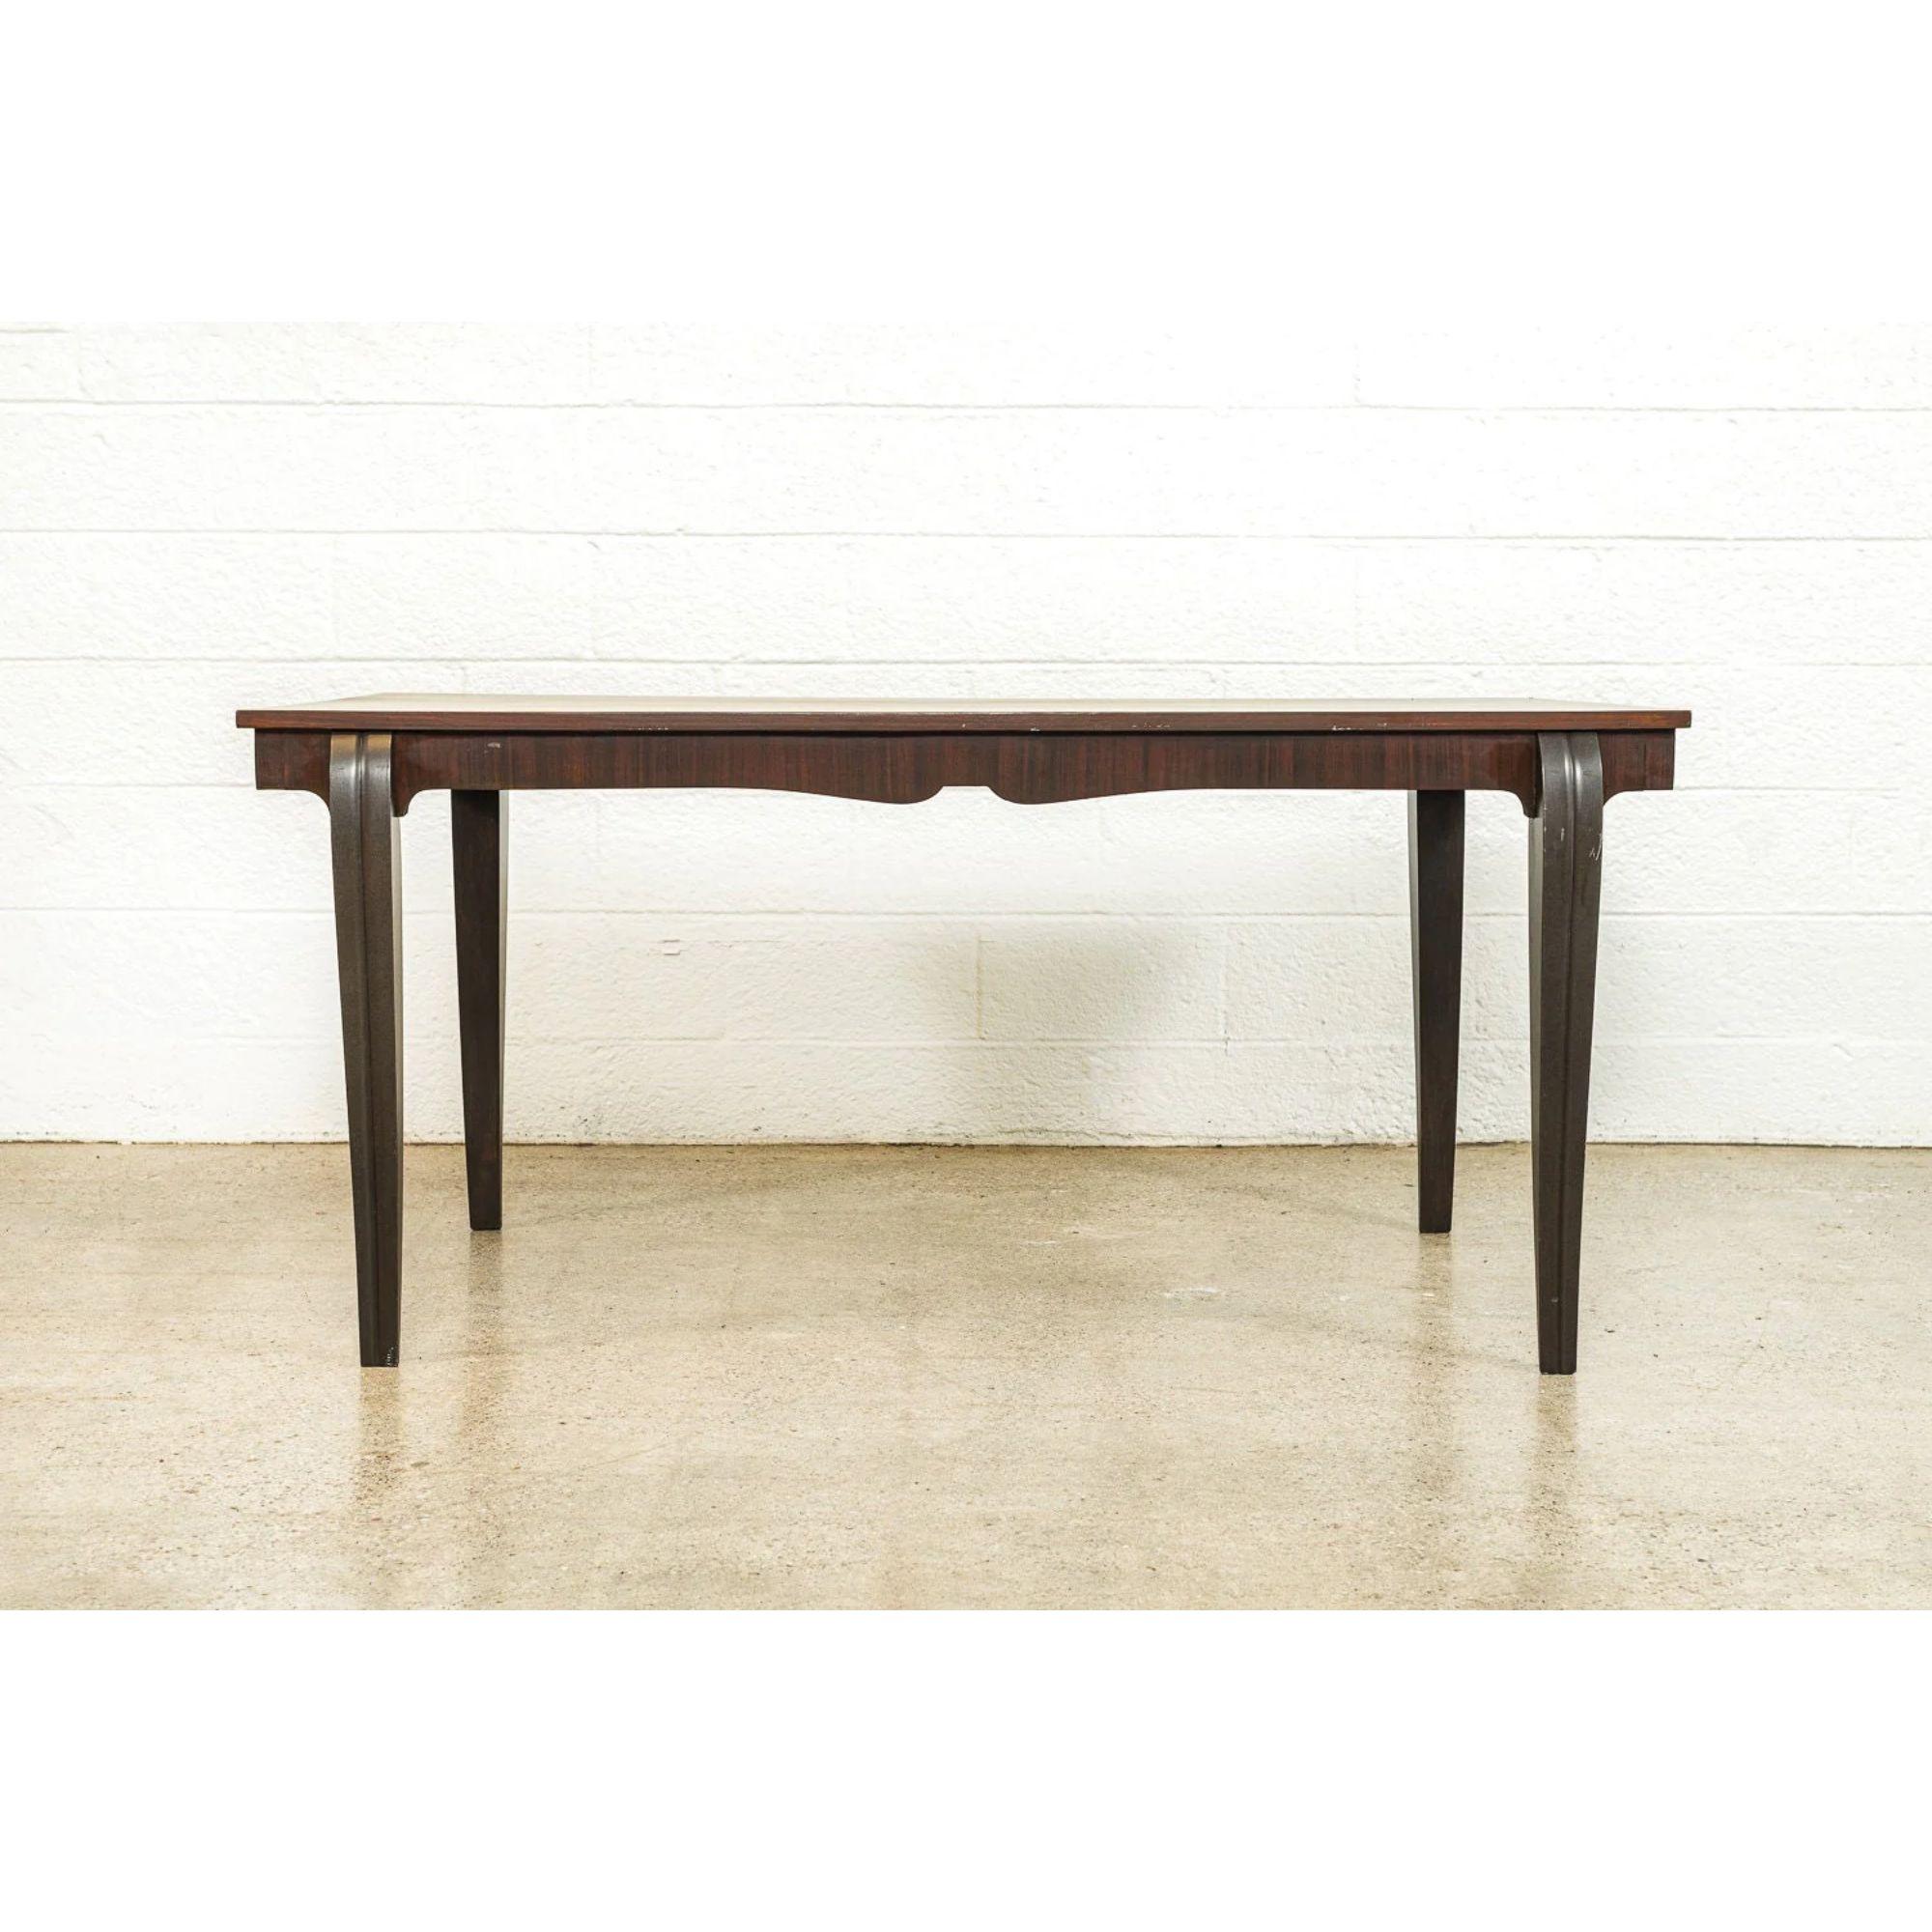 20th Century Antique French Art Deco Dining Table or Writing Desk in Mahogany Wood, 1930s For Sale